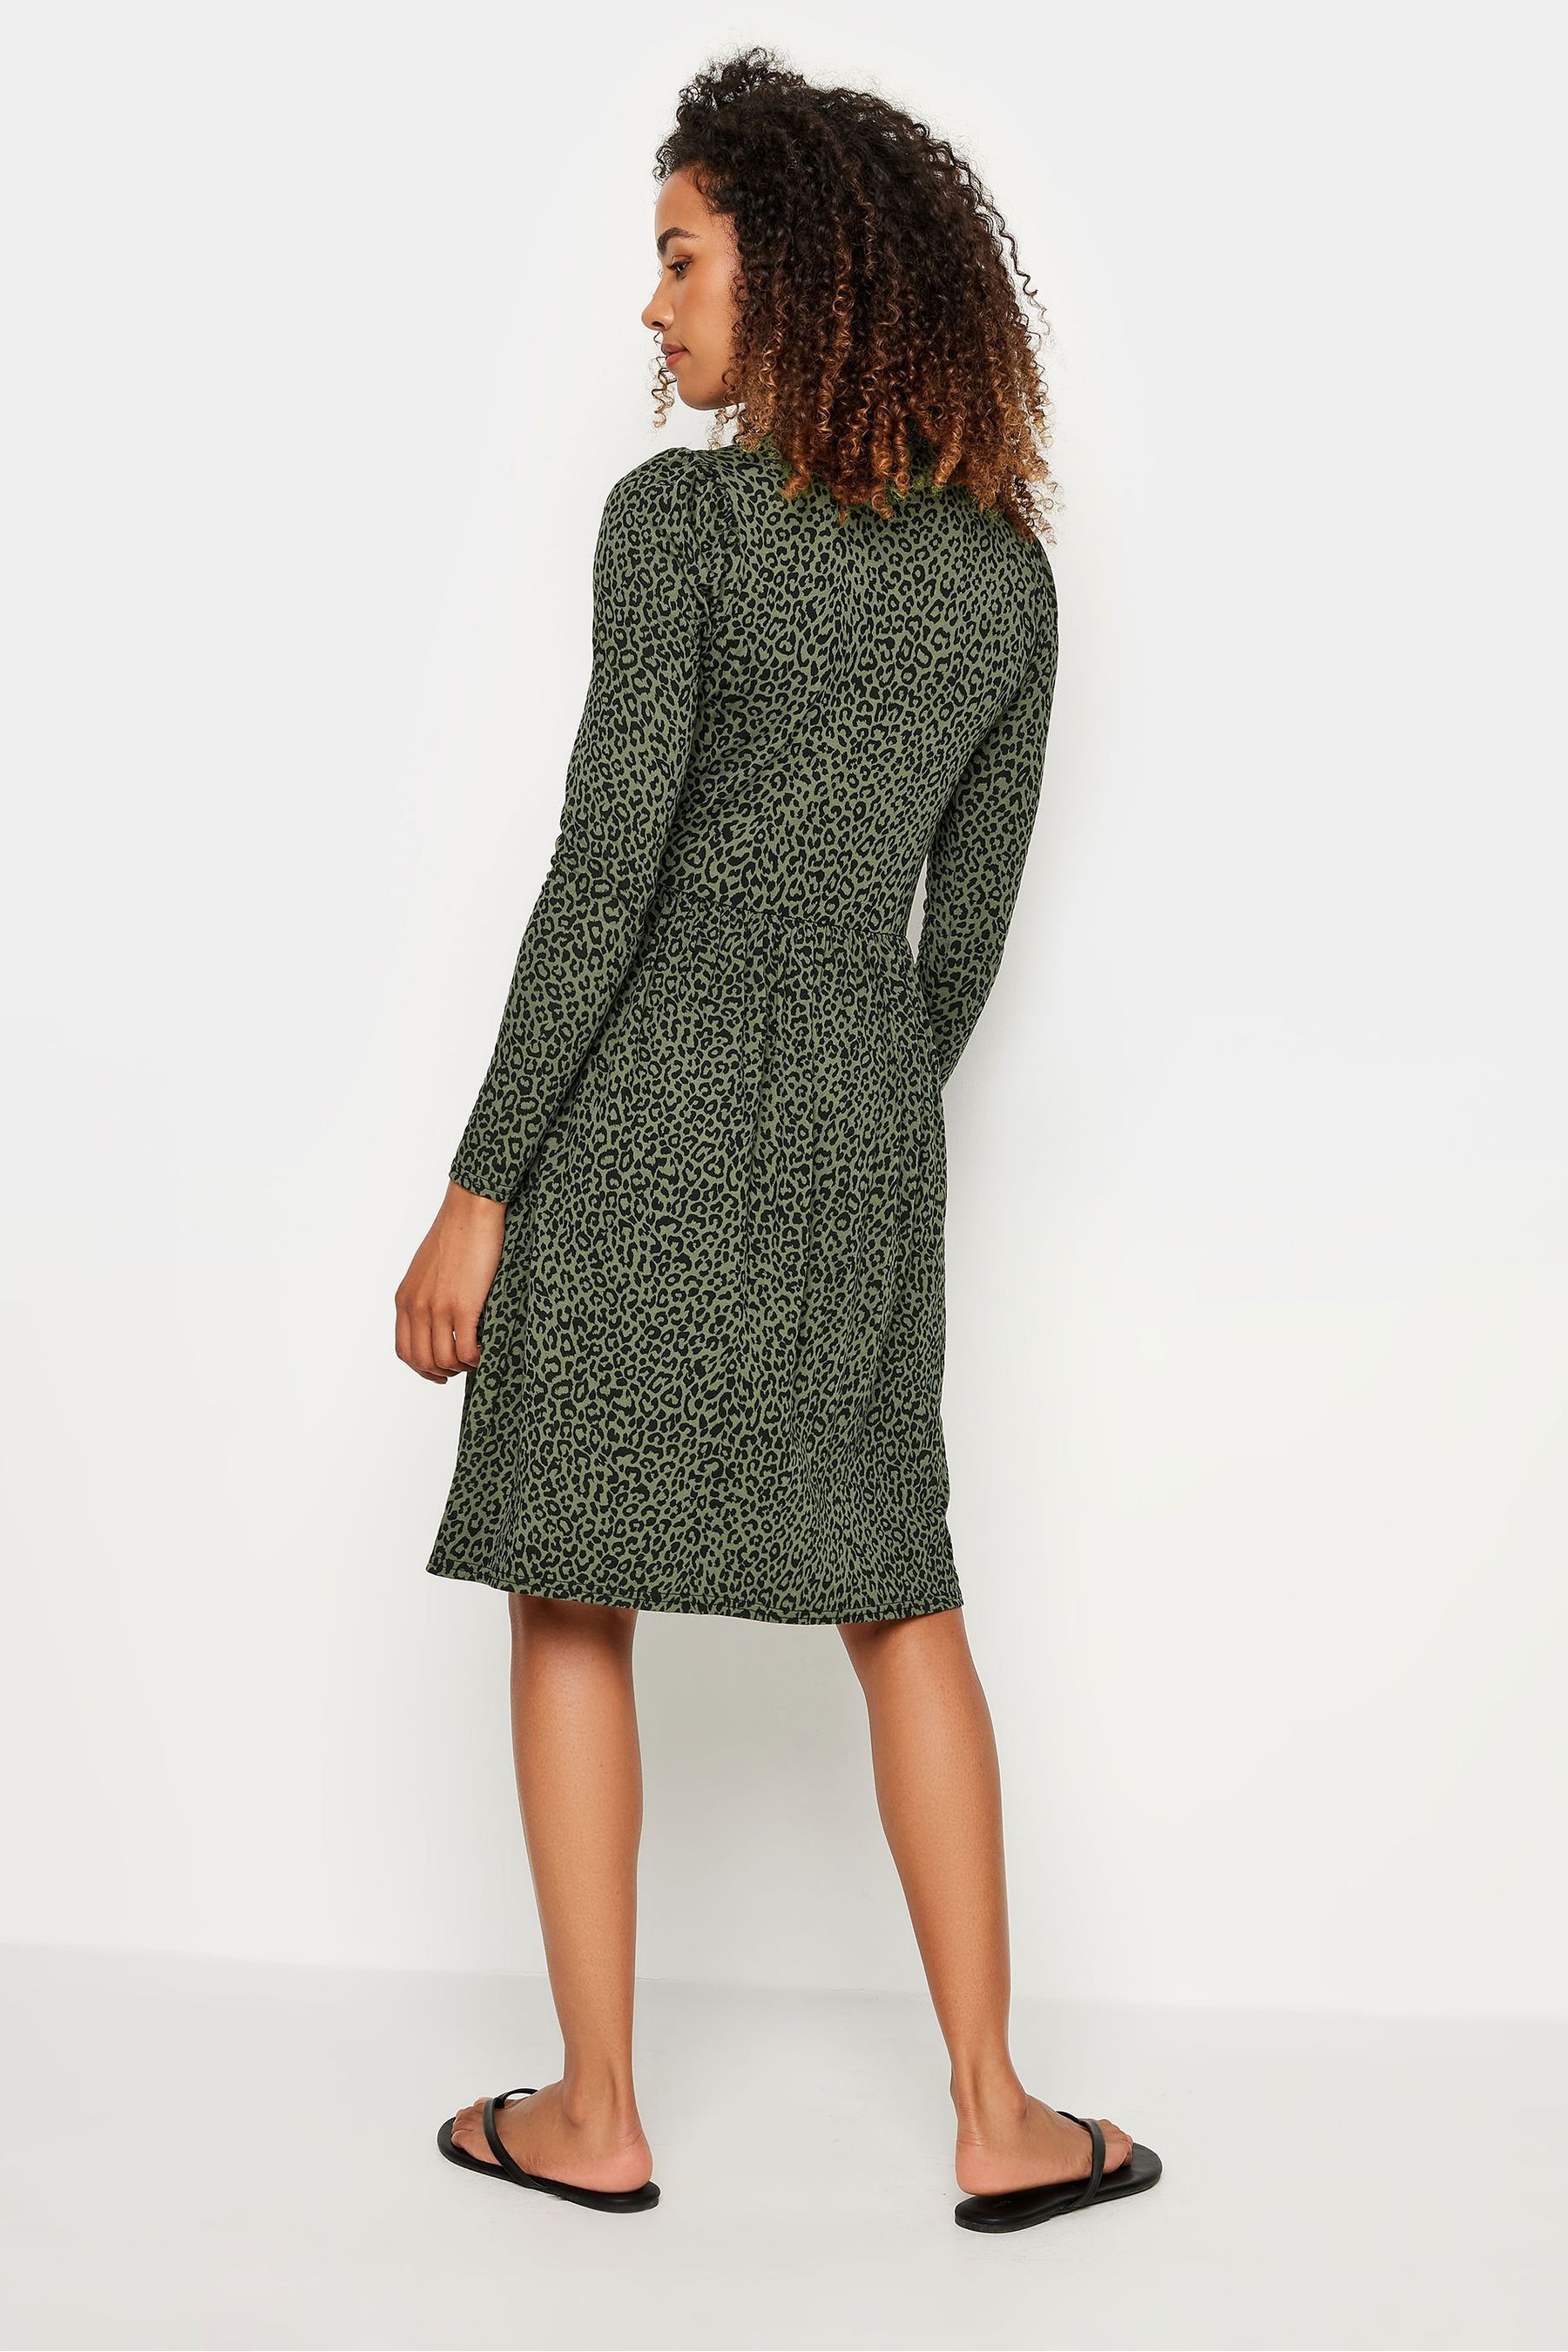 Buy M&Co Green Short Smock Dress from the Next UK online shop